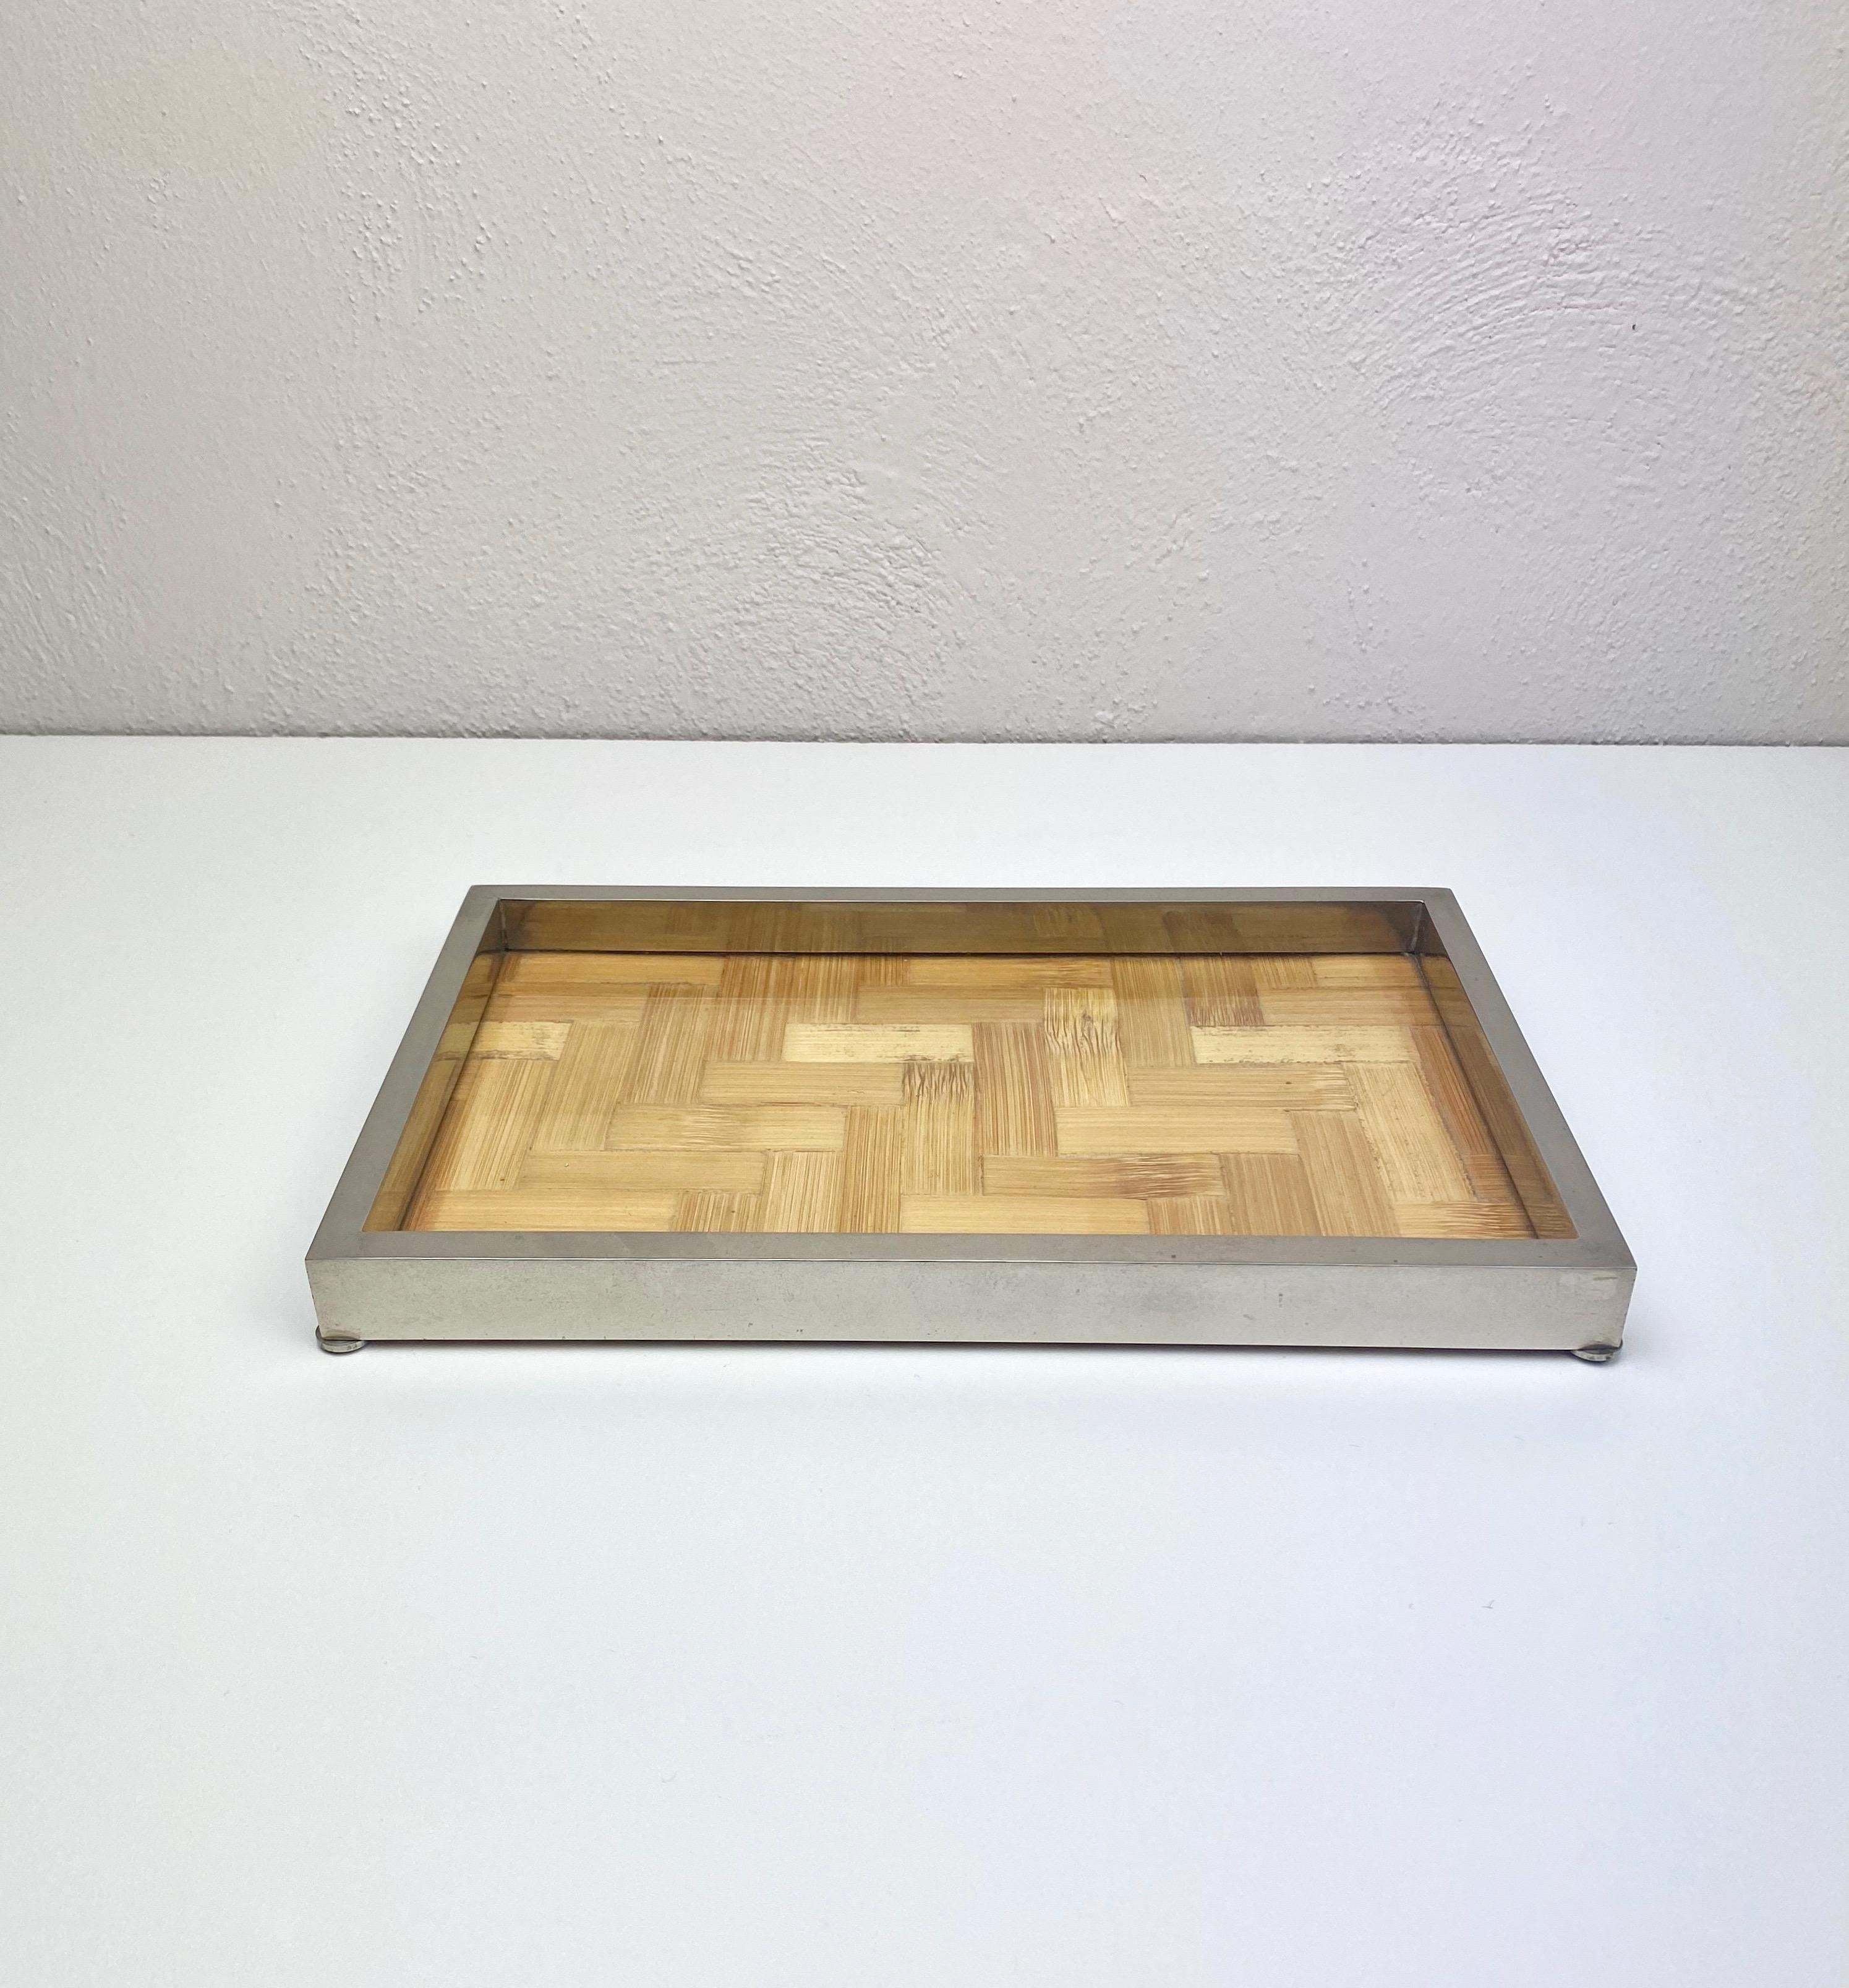 Centrepiece tray by the Italian designer Tommaso Barbi (original label still attached) in chrome, glass and bamboo. Made in Italy in the 1970s.